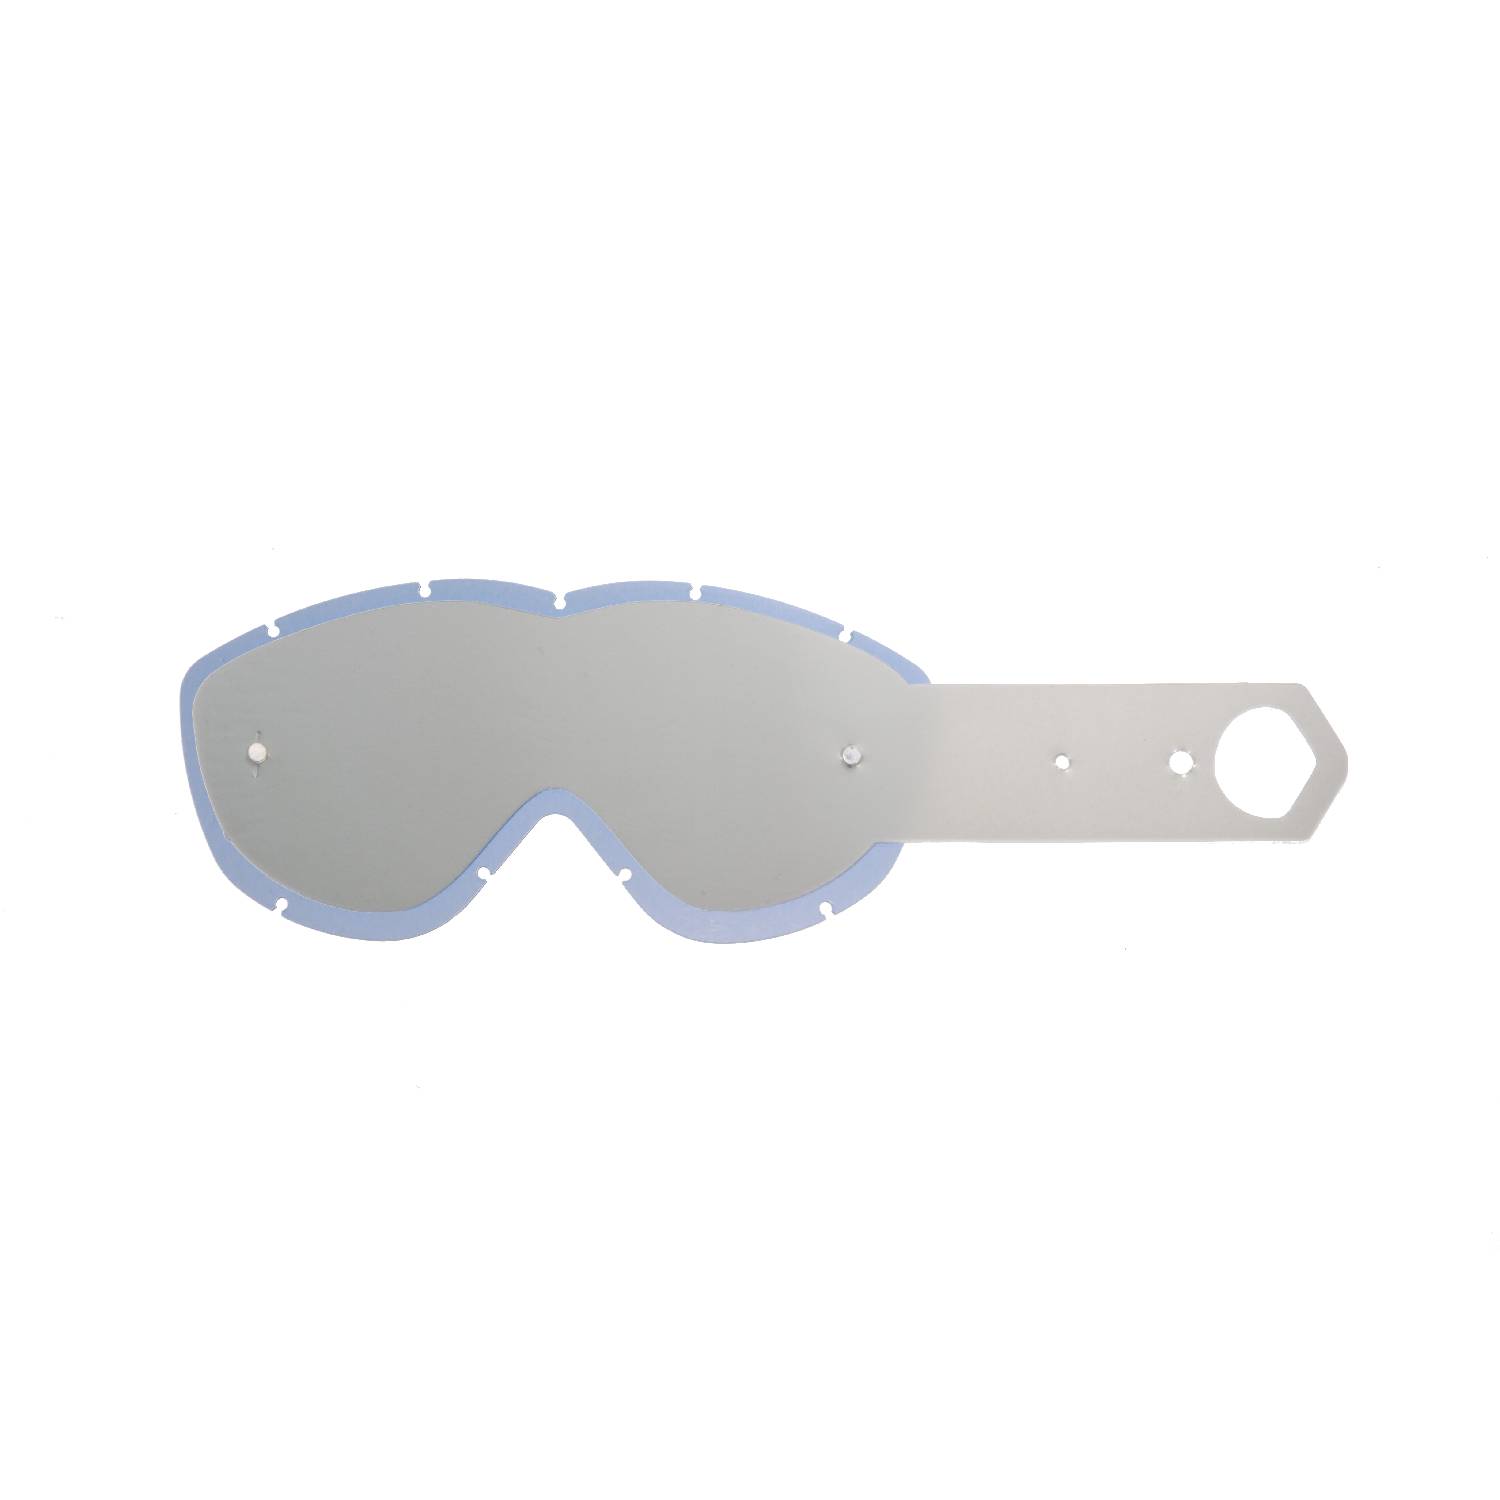 combo lenses with smokey lenses with 10 tear off compatible for Spy Alloy / Targa goggle